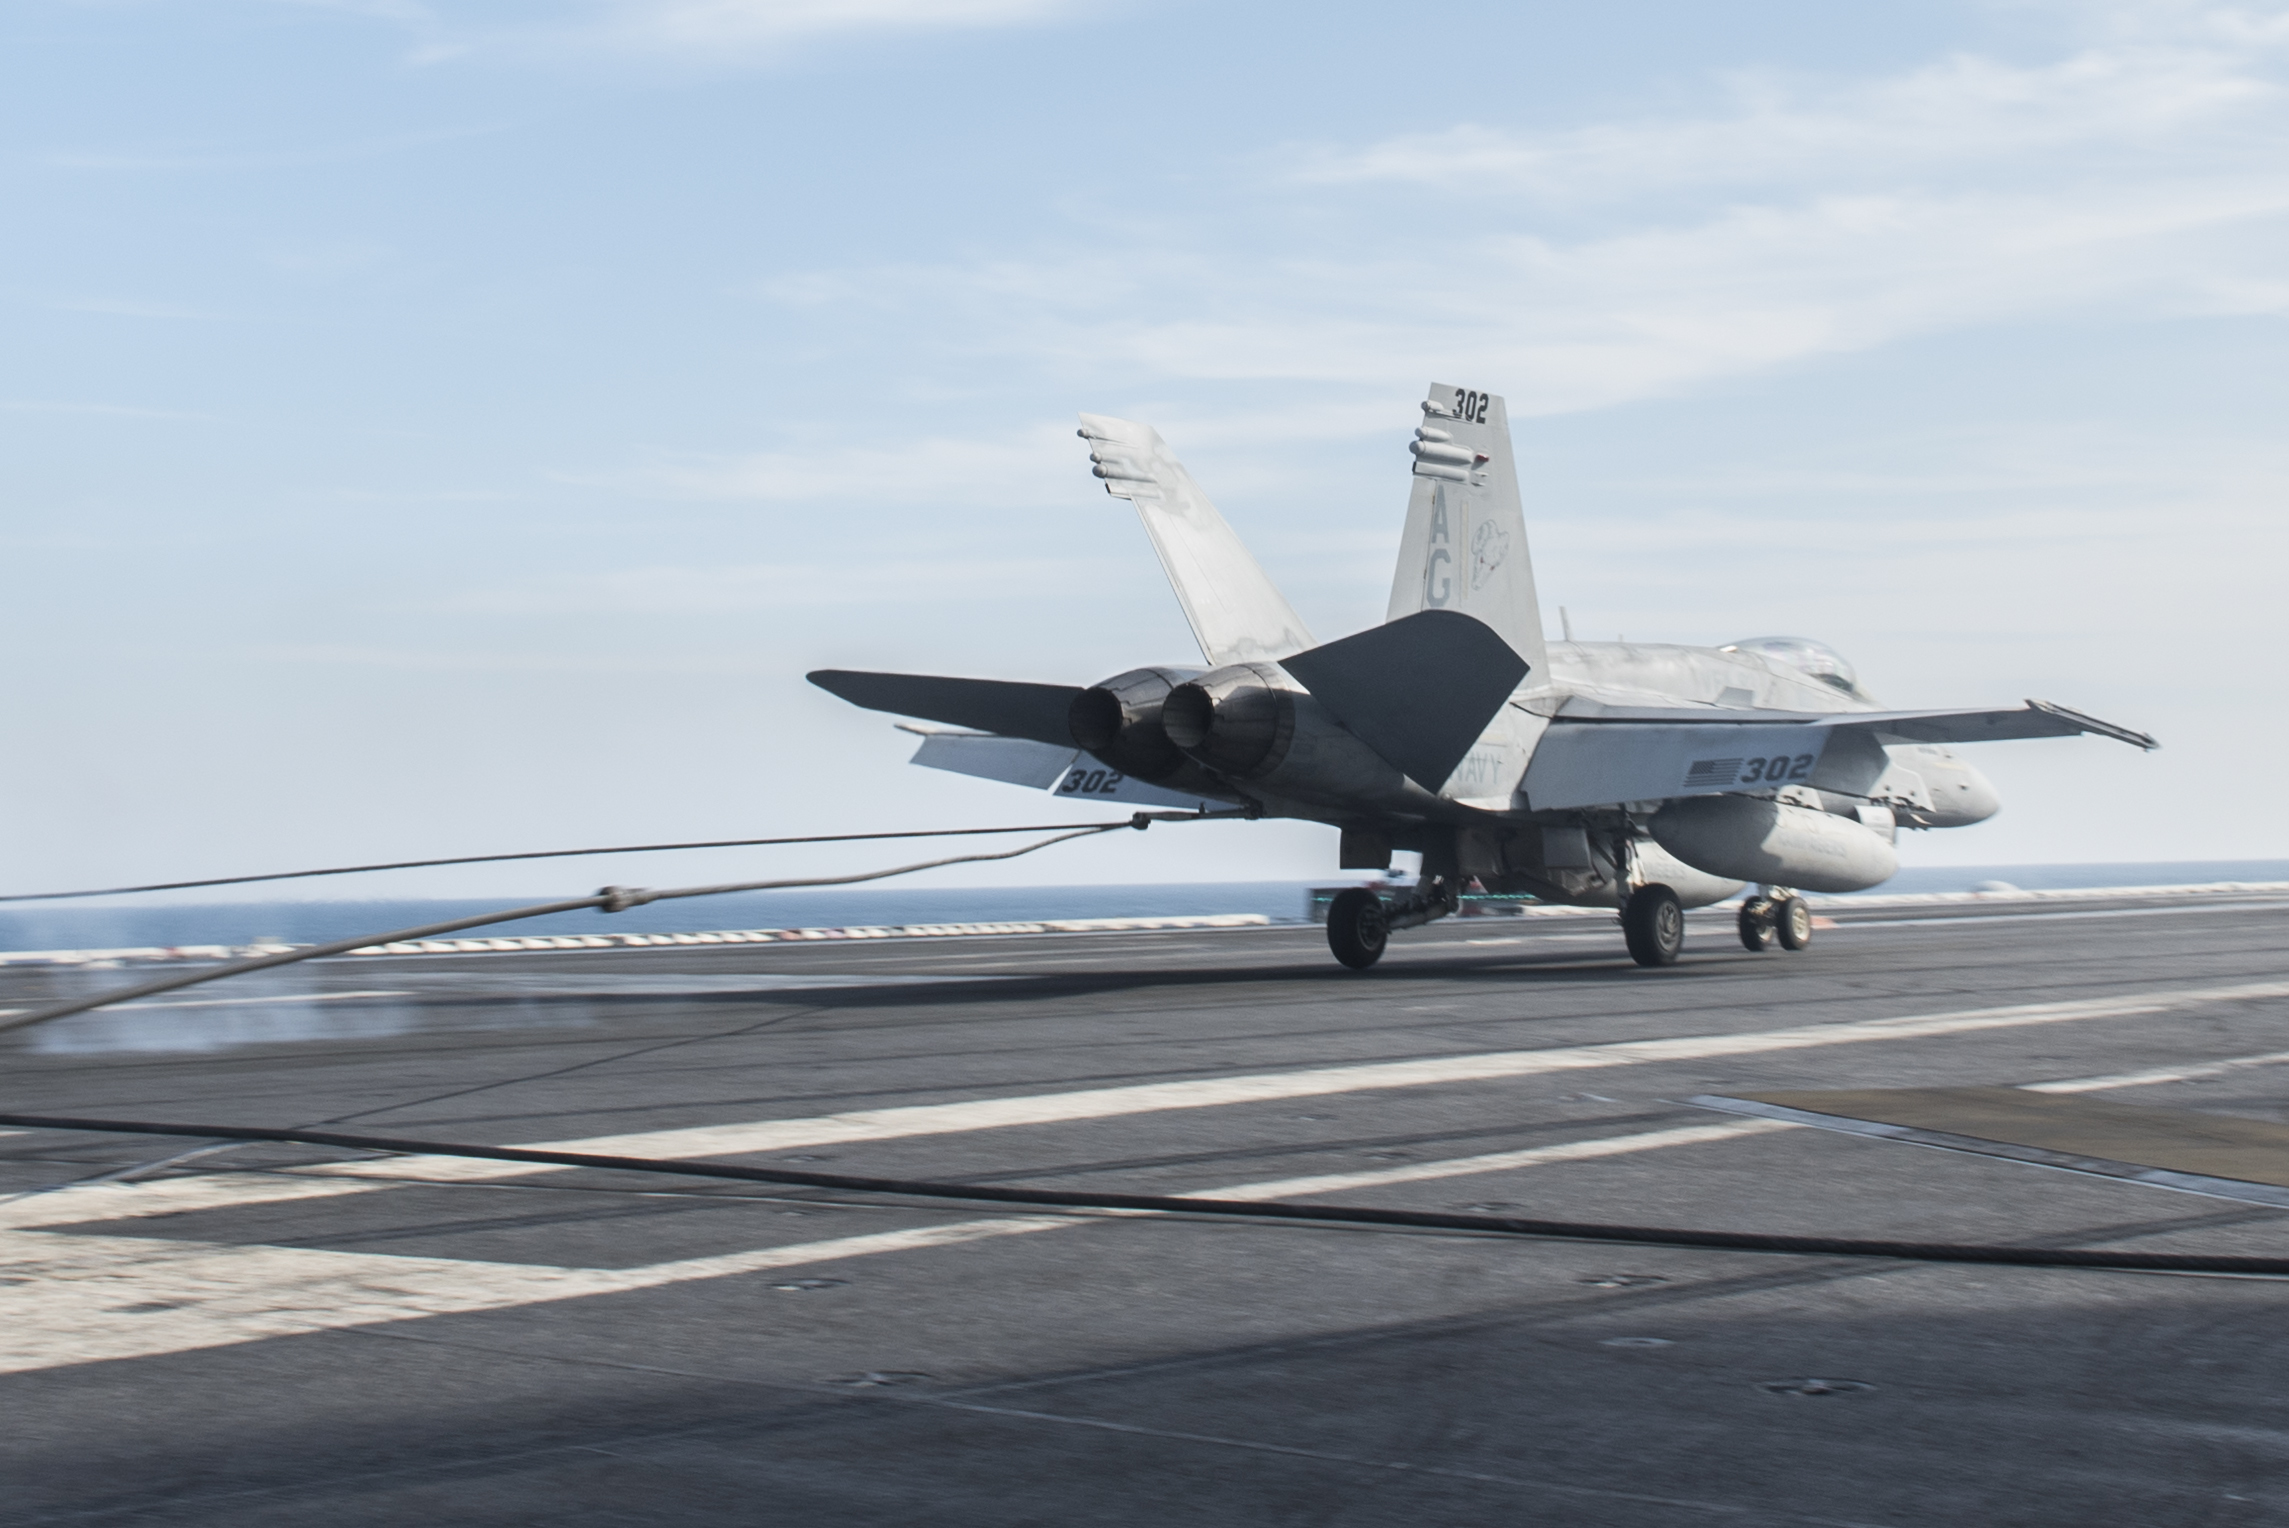 PHOTO: On Dec. 25, 2015, Capt. Frederick "Lucky" Luchtman completes his 1,000th arrested landing while flying an F/A-18C Hornet on the flight deck of aircraft carrier USS Harry S. Truman (CVN 75).